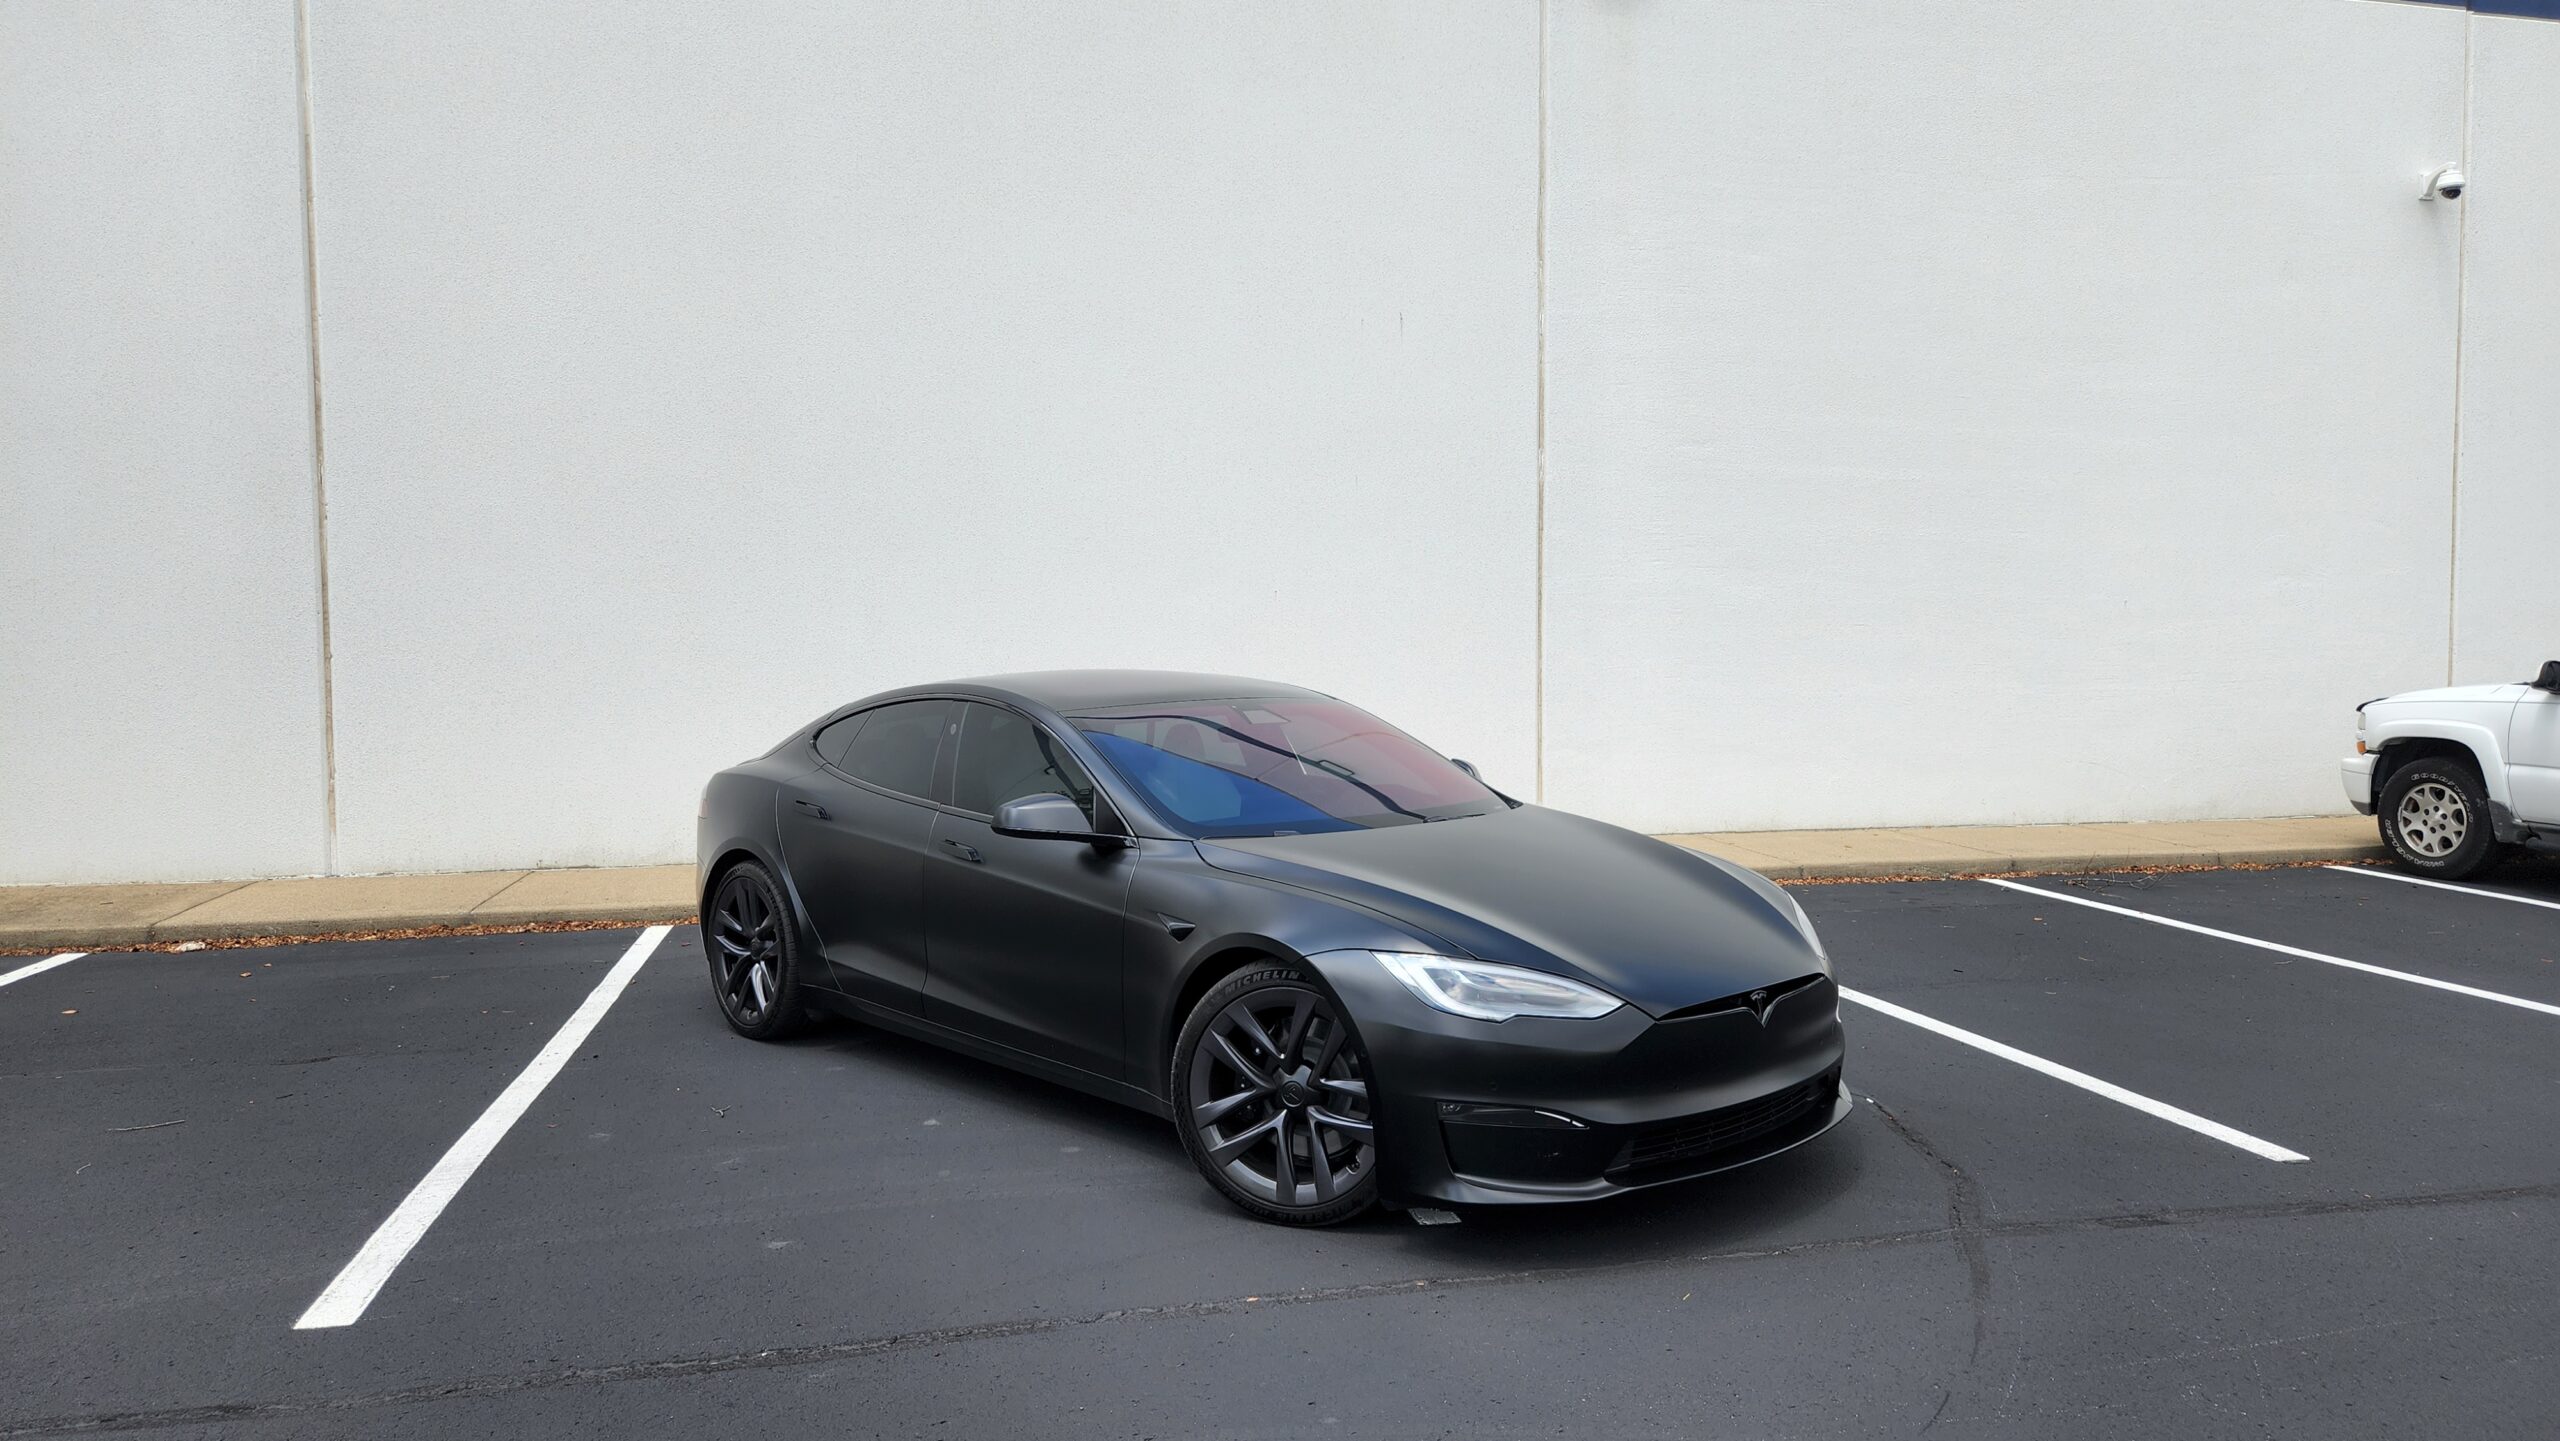 This is the Tesla Model S Plaid's design from the front angle. How do you like the matte paint?